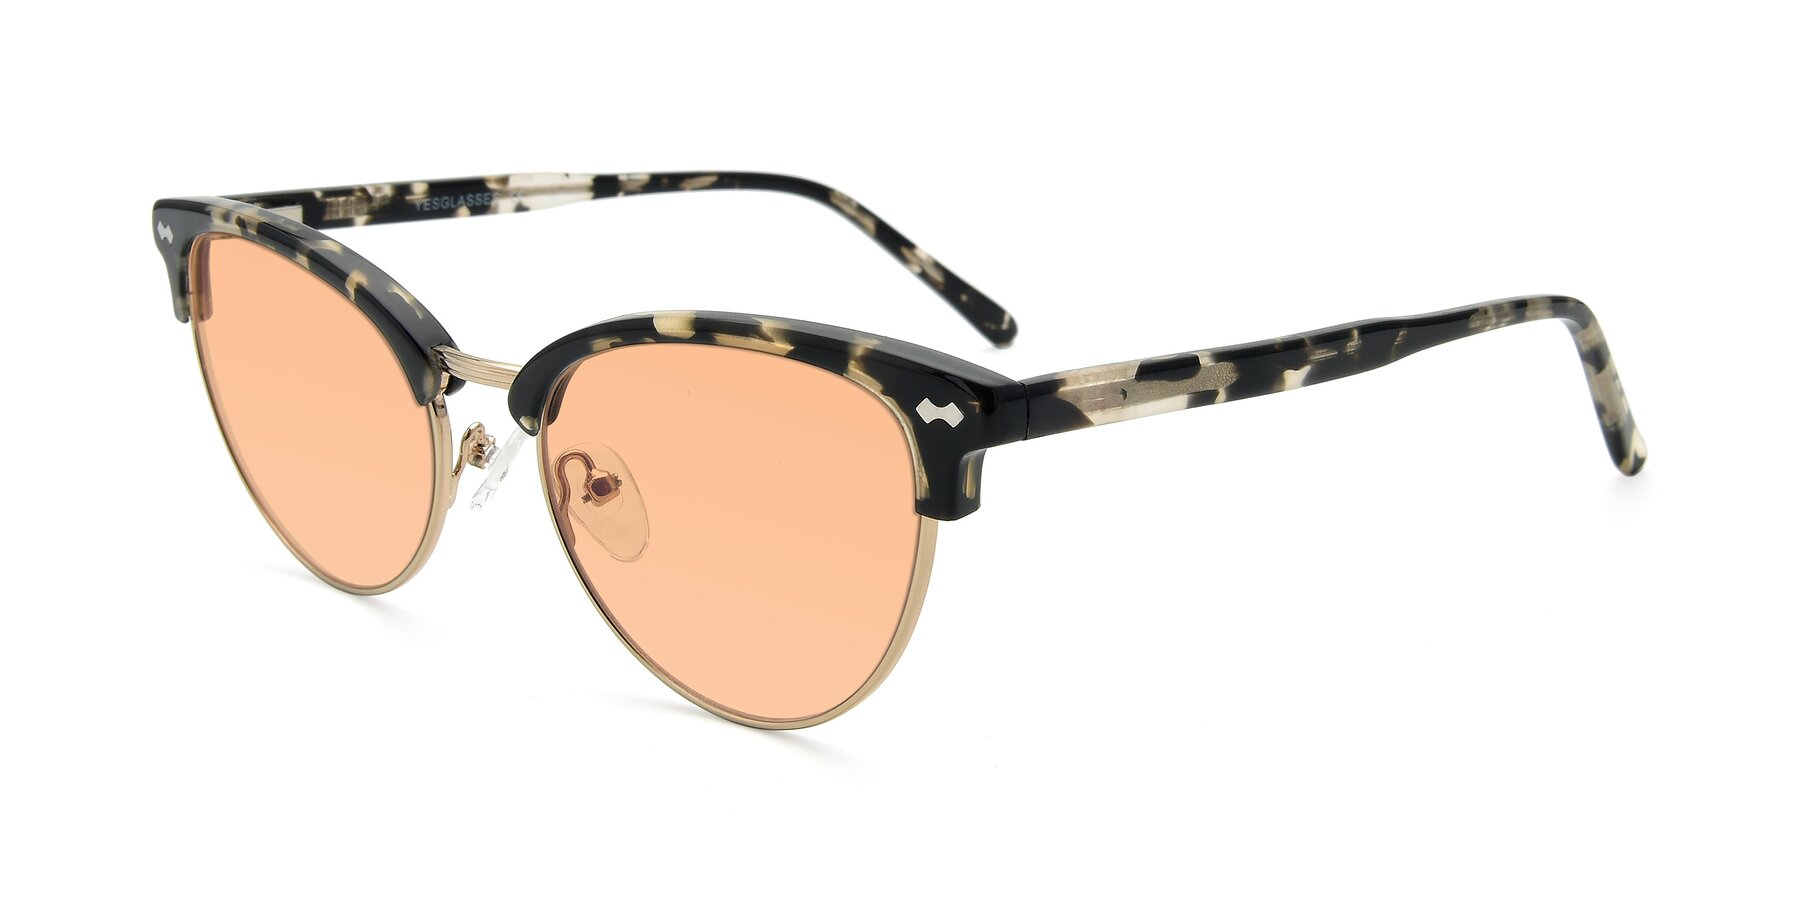 Angle of 17461 in Tortoise-Gold with Light Orange Tinted Lenses